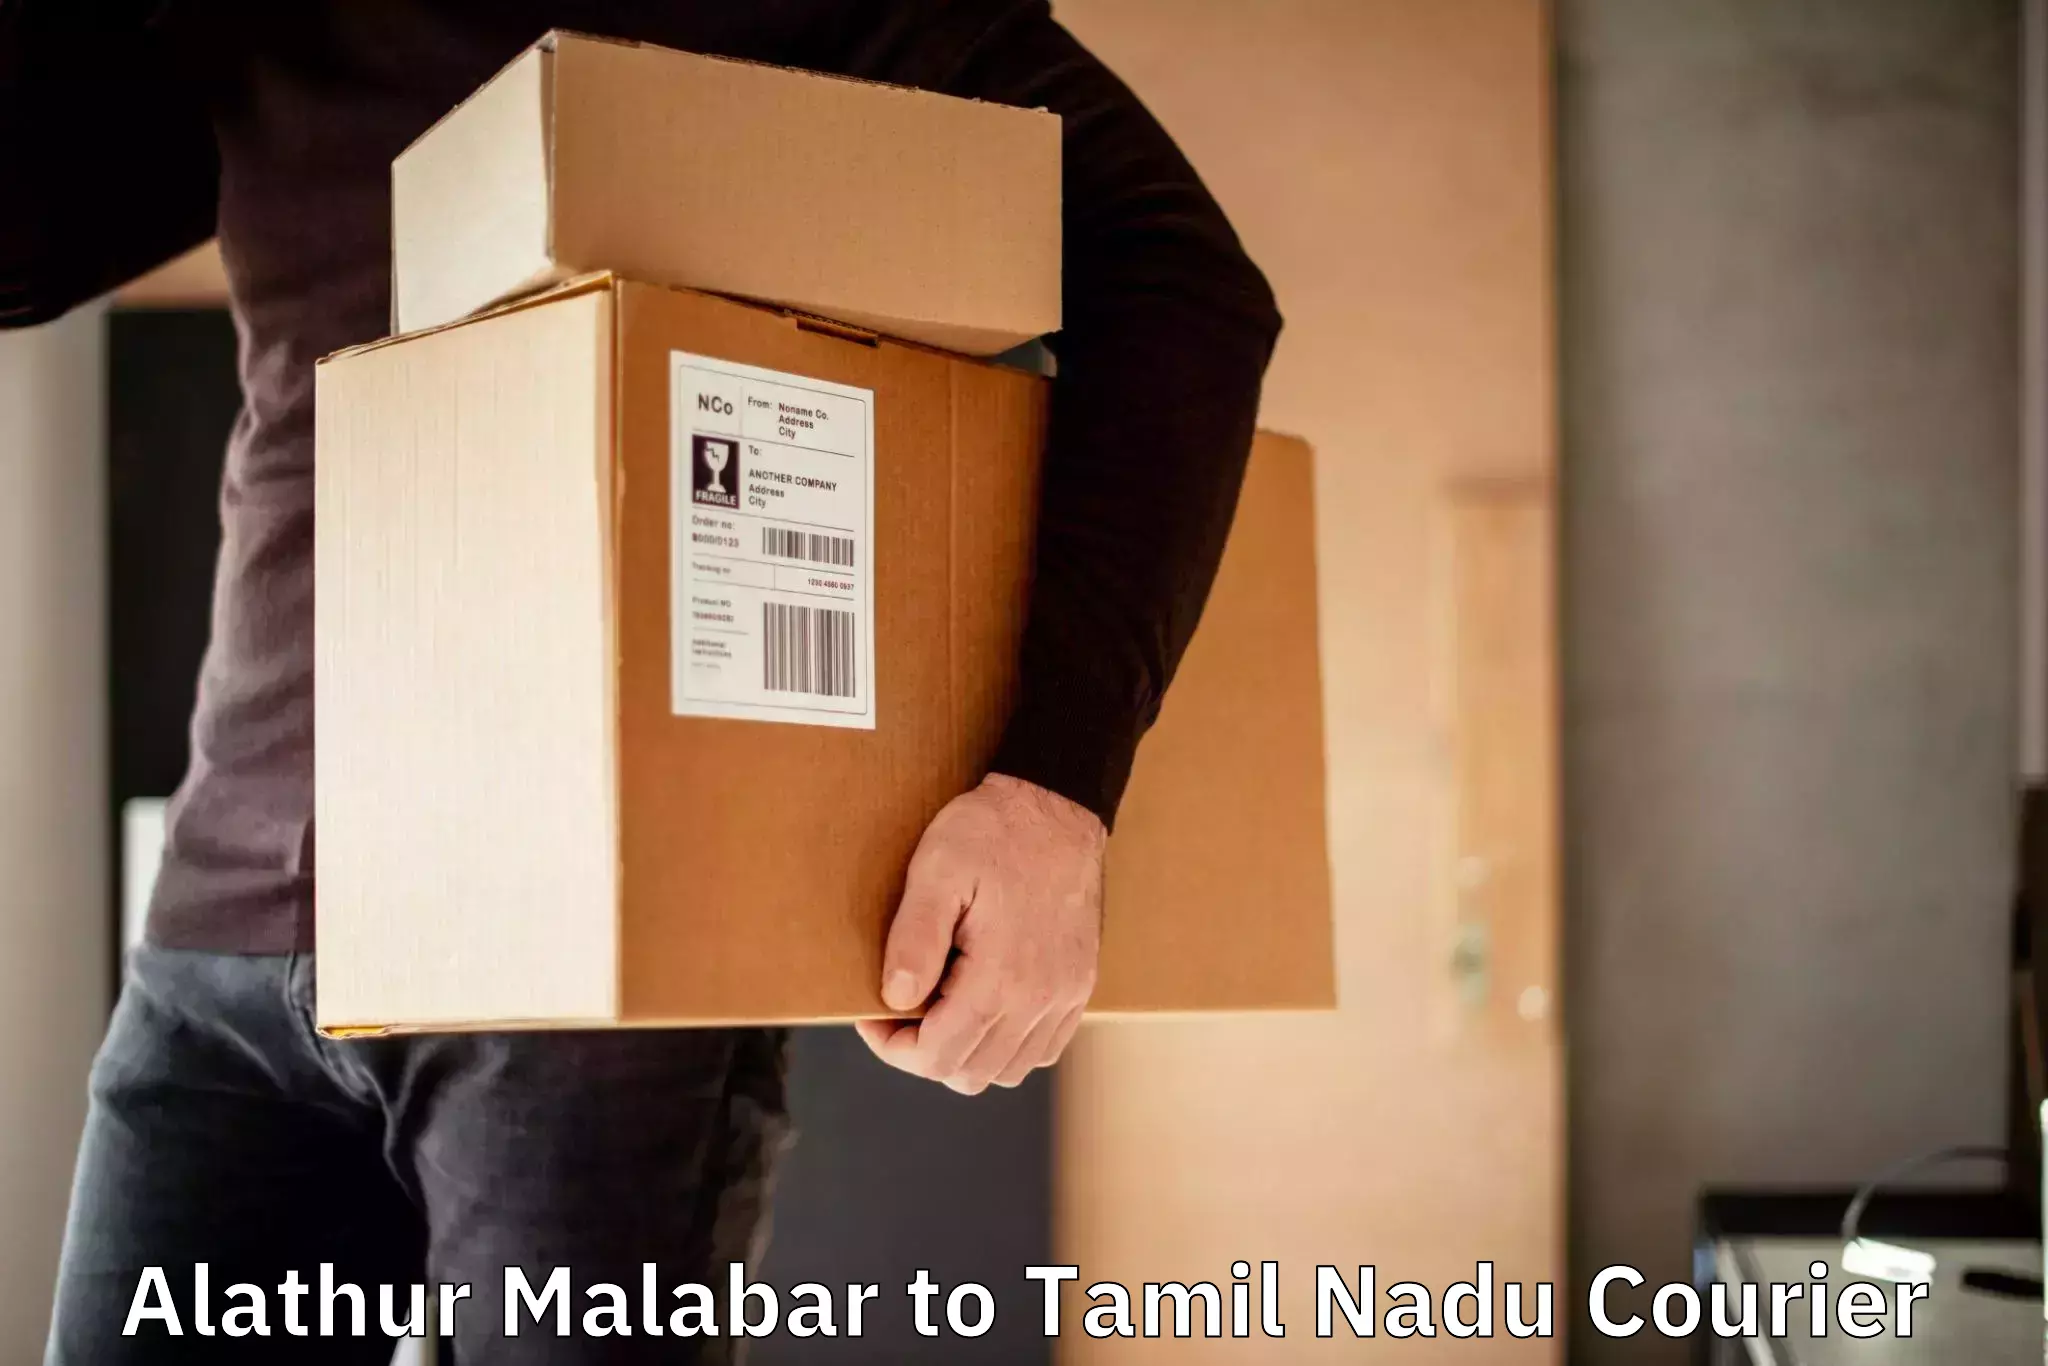 Optimized delivery routes Alathur Malabar to Trichy